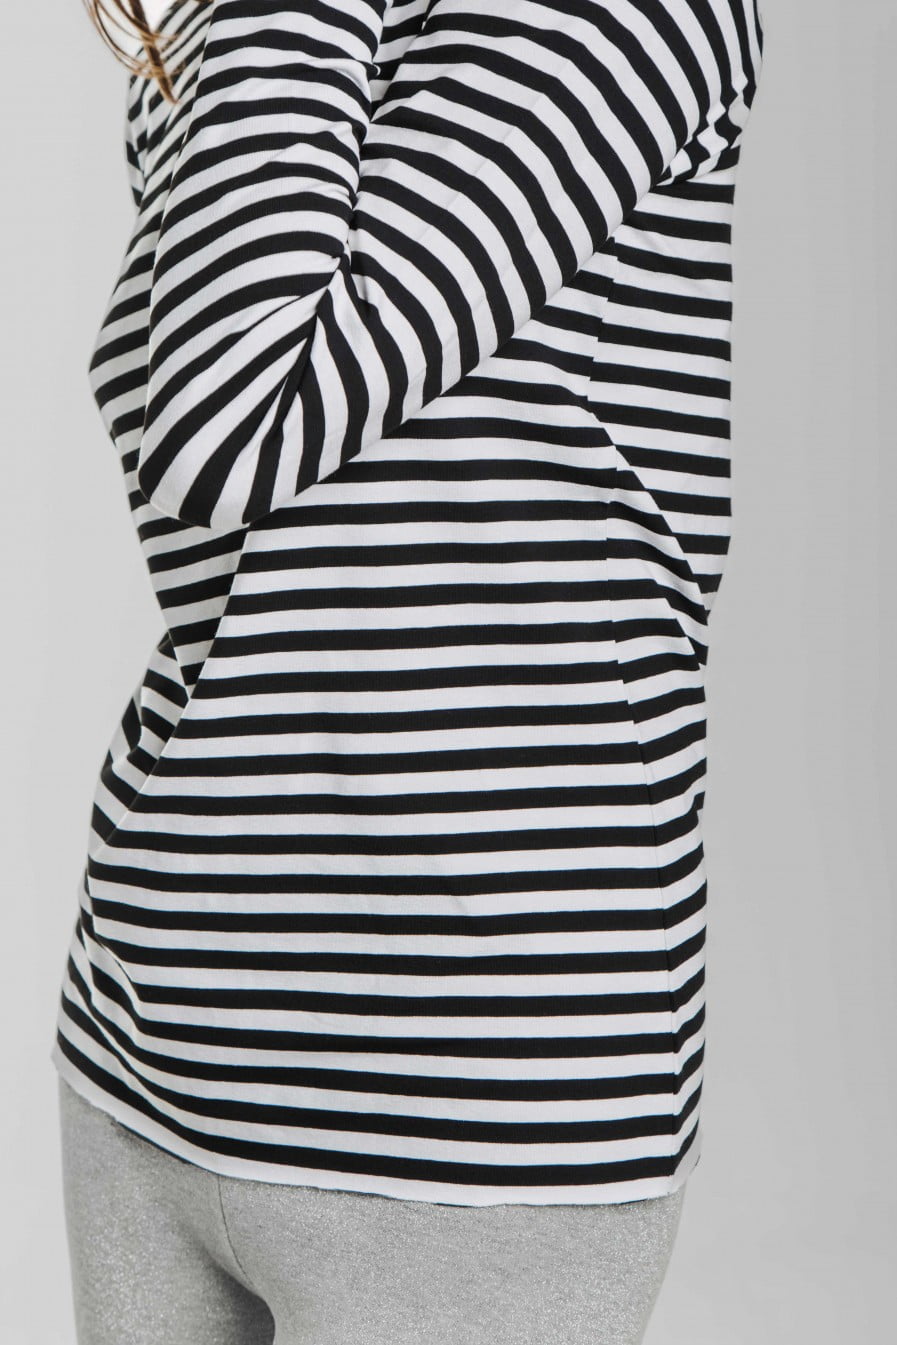 M50 One Size long-sleeve | WIDE STRIPES